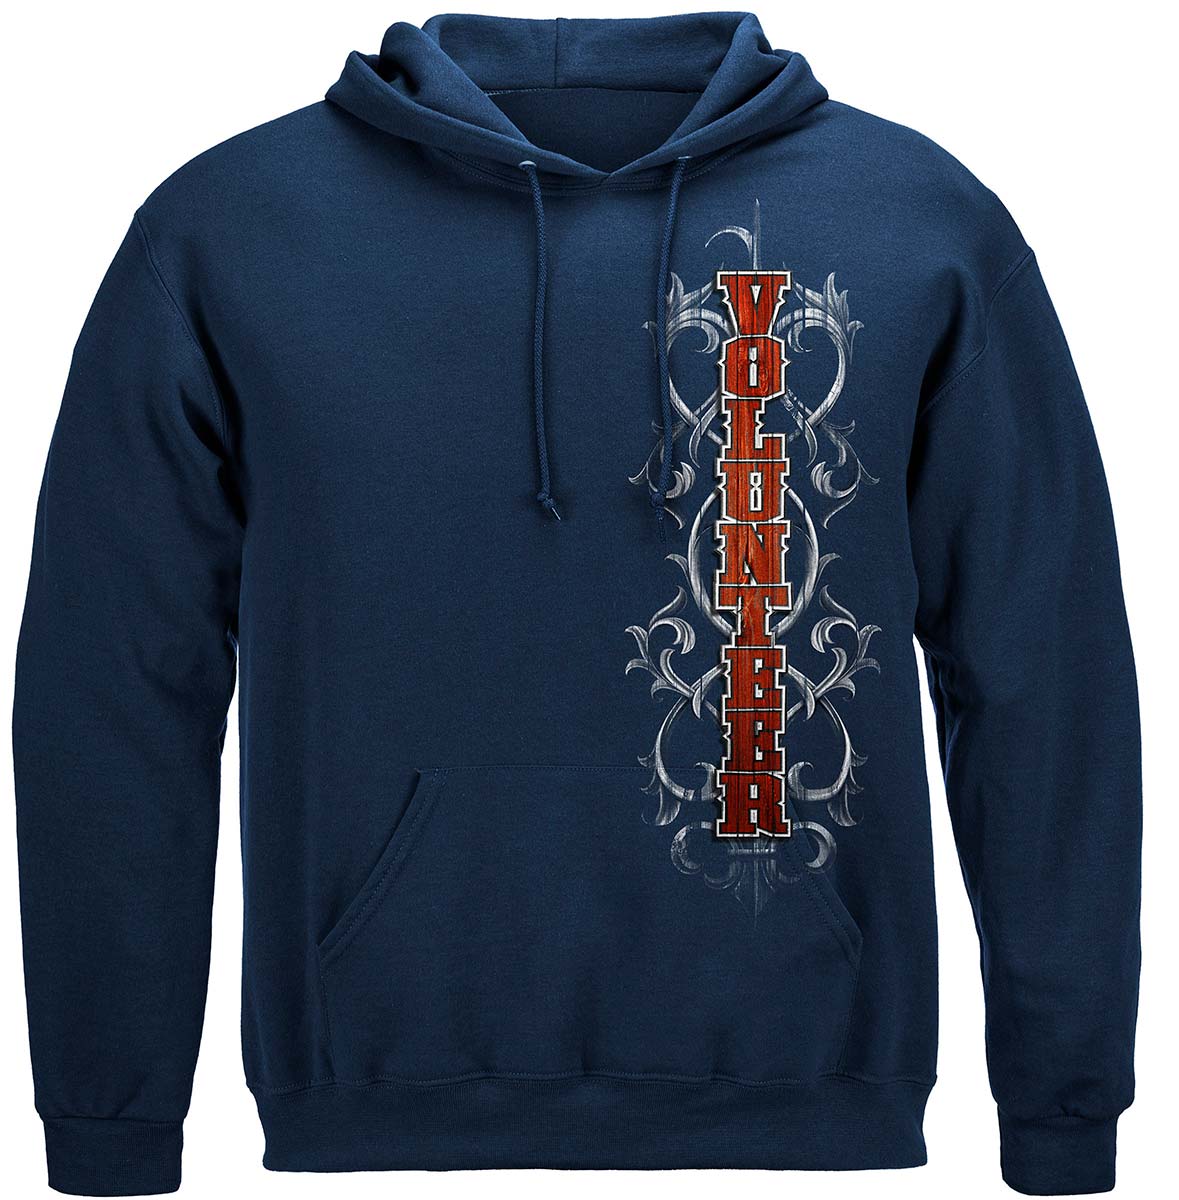 Fire Dept Faded Planks Premium Hooded Sweat Shirt